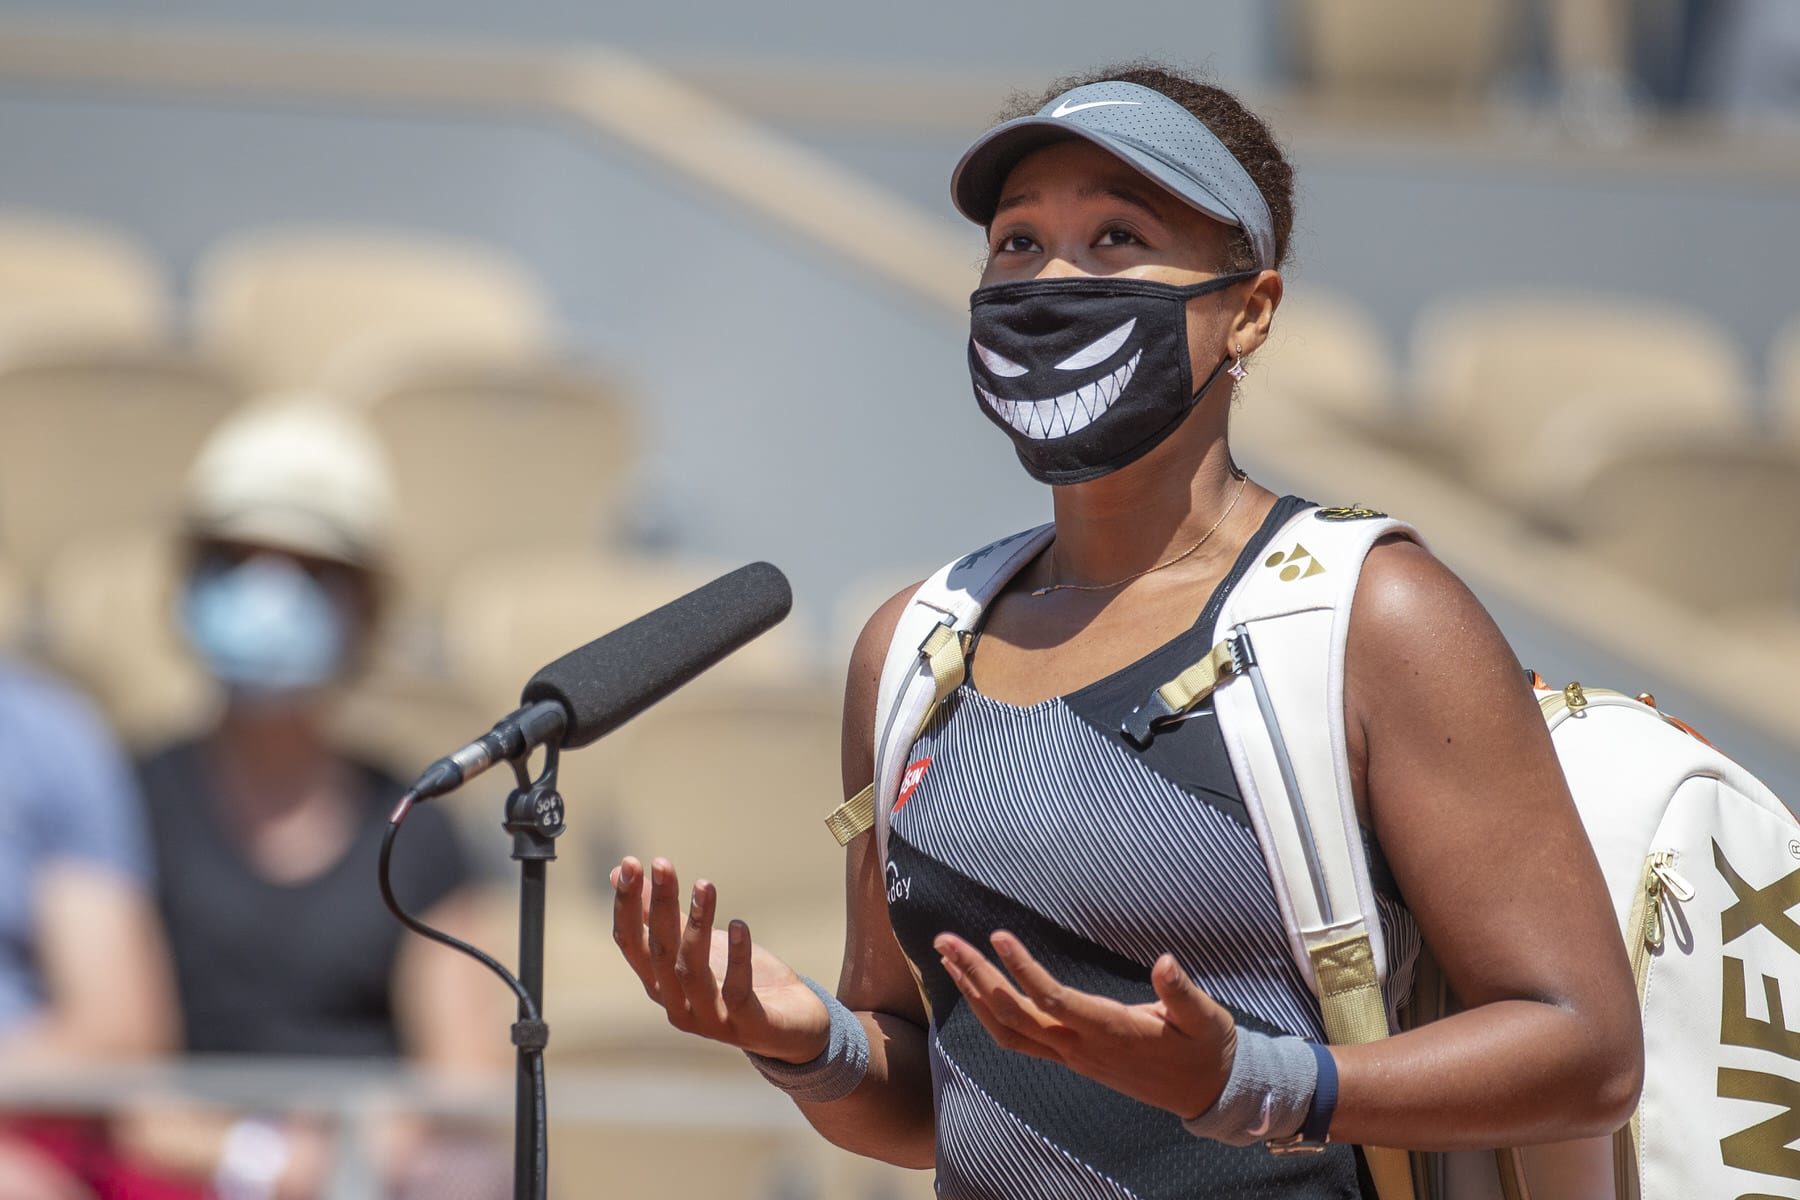 May 30. Naomi Osaka of Japan conducts an on court interview wearing a mask after her victory against Patricia Maria Tig of Romania in the first round of the Women's Singles competition on Court Philippe-Chatrier at the 2021 French Open